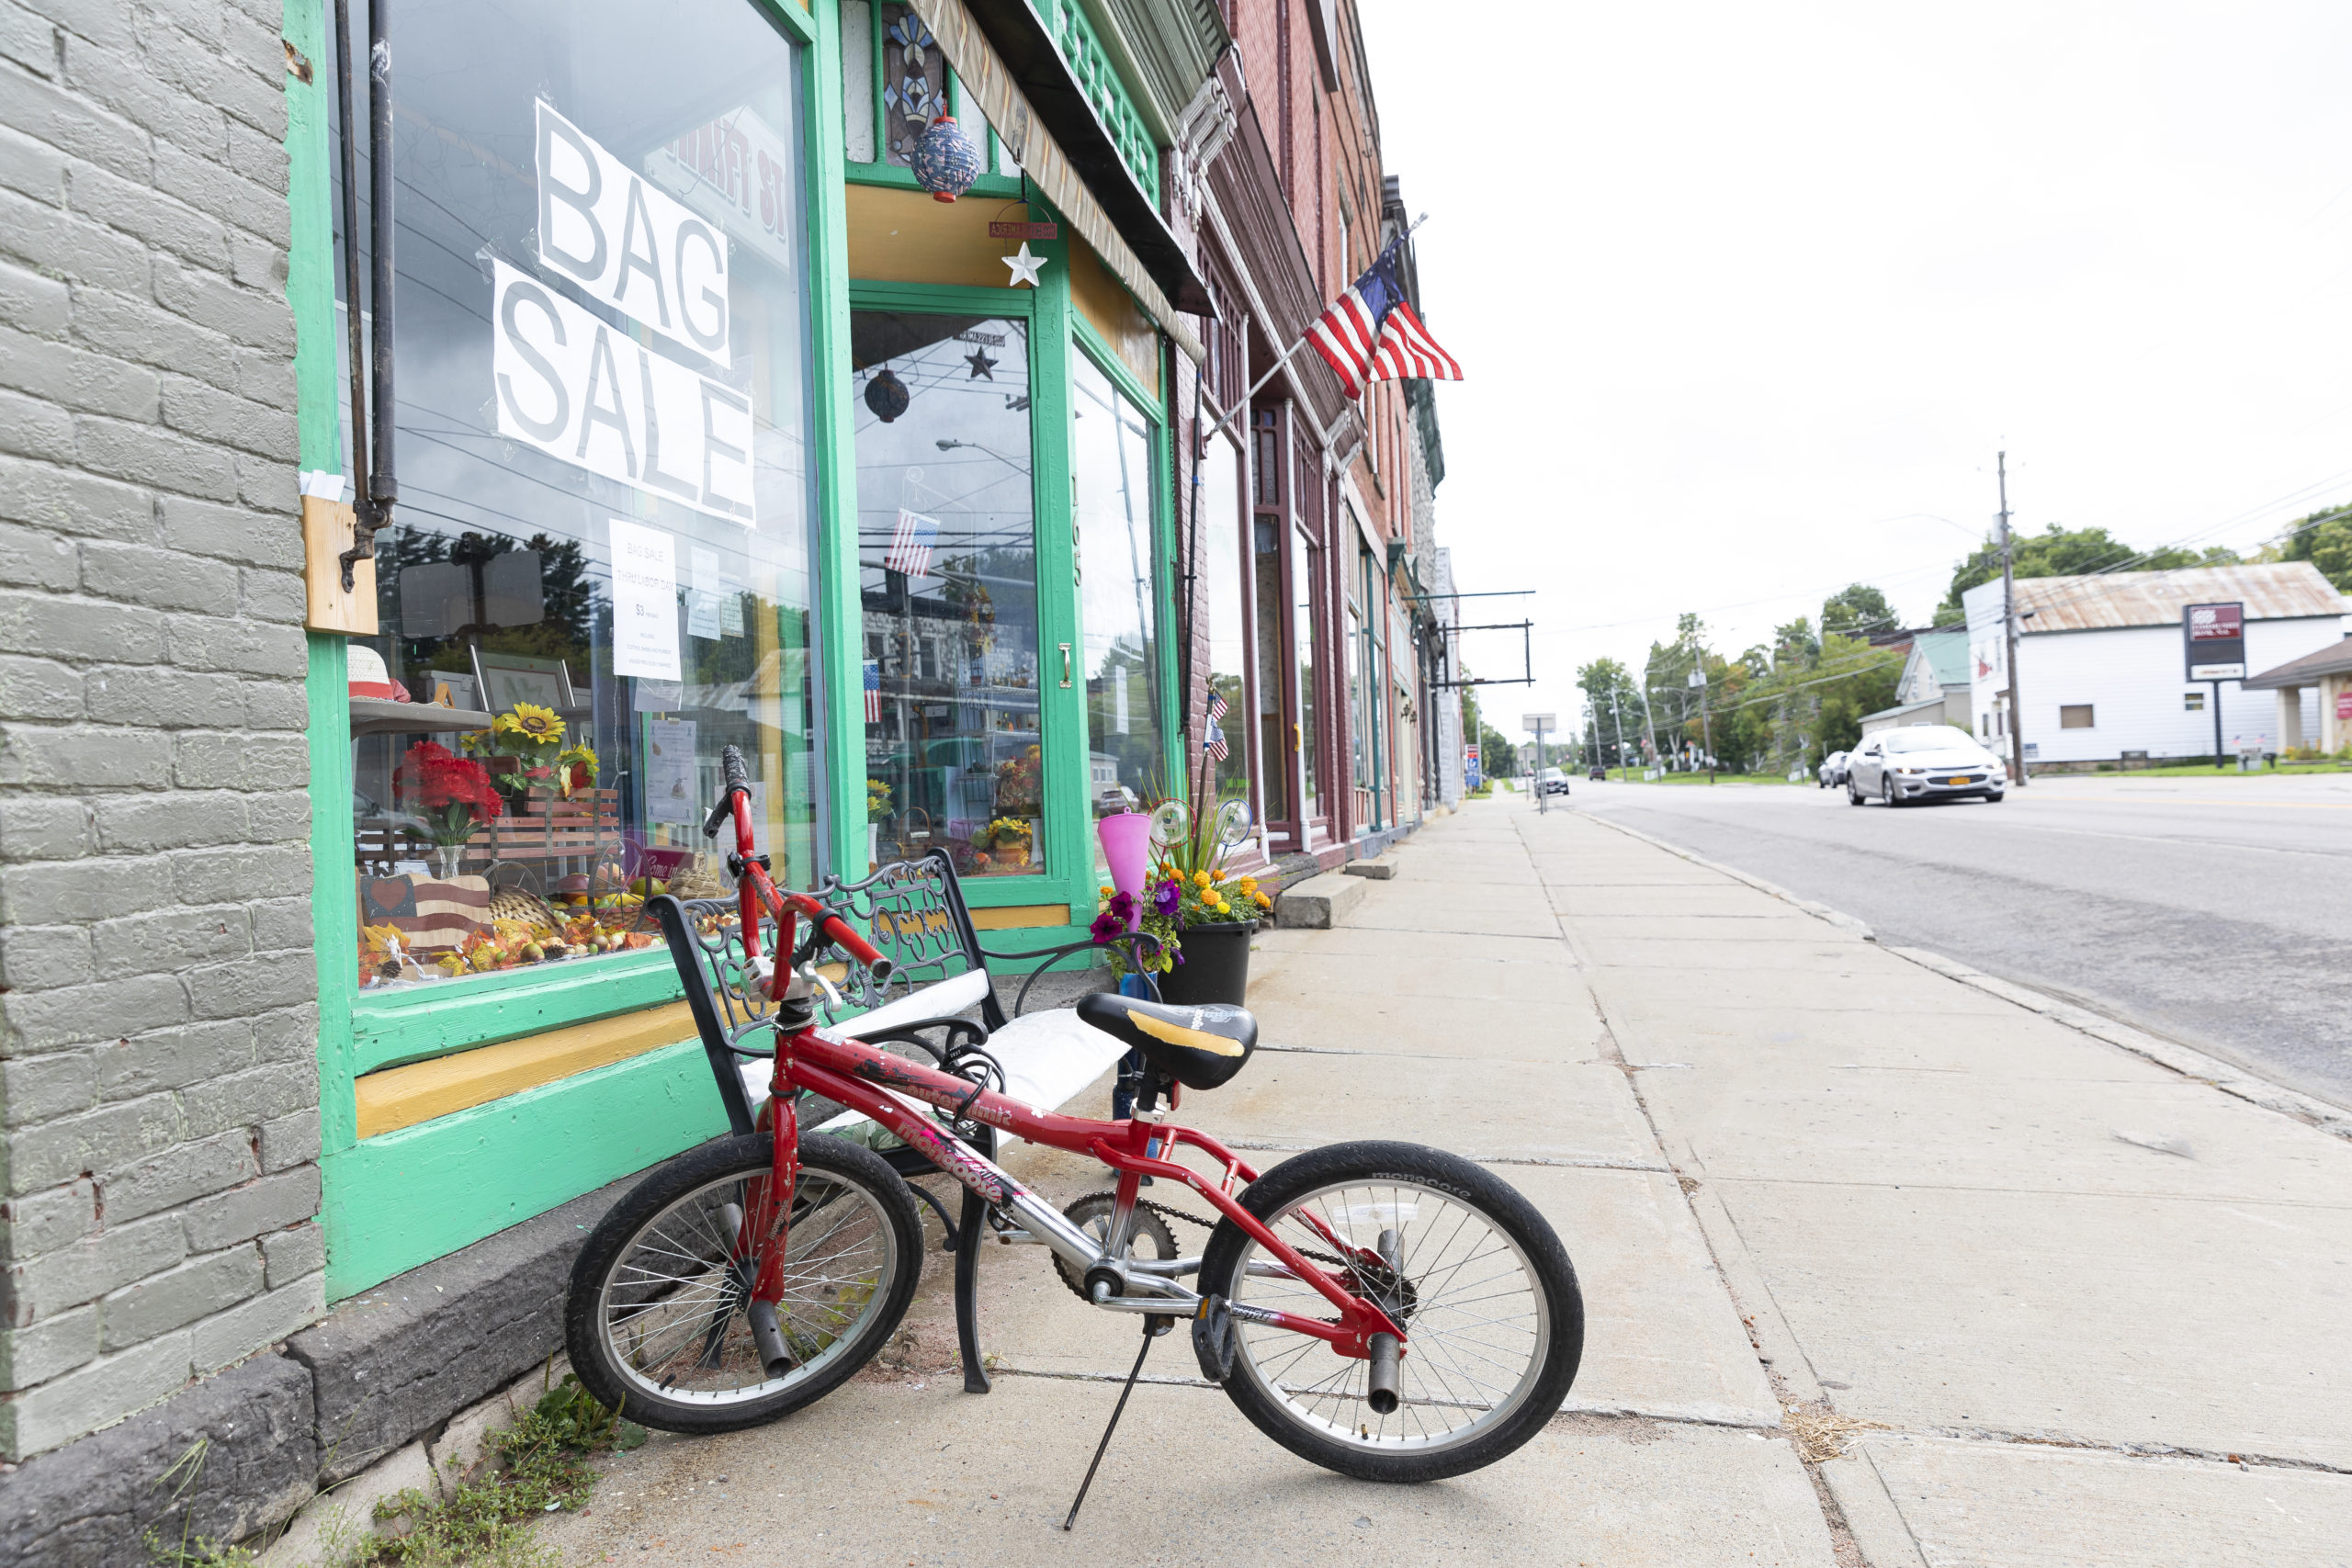 A bicycle sits outside a storefront in Chateaugay